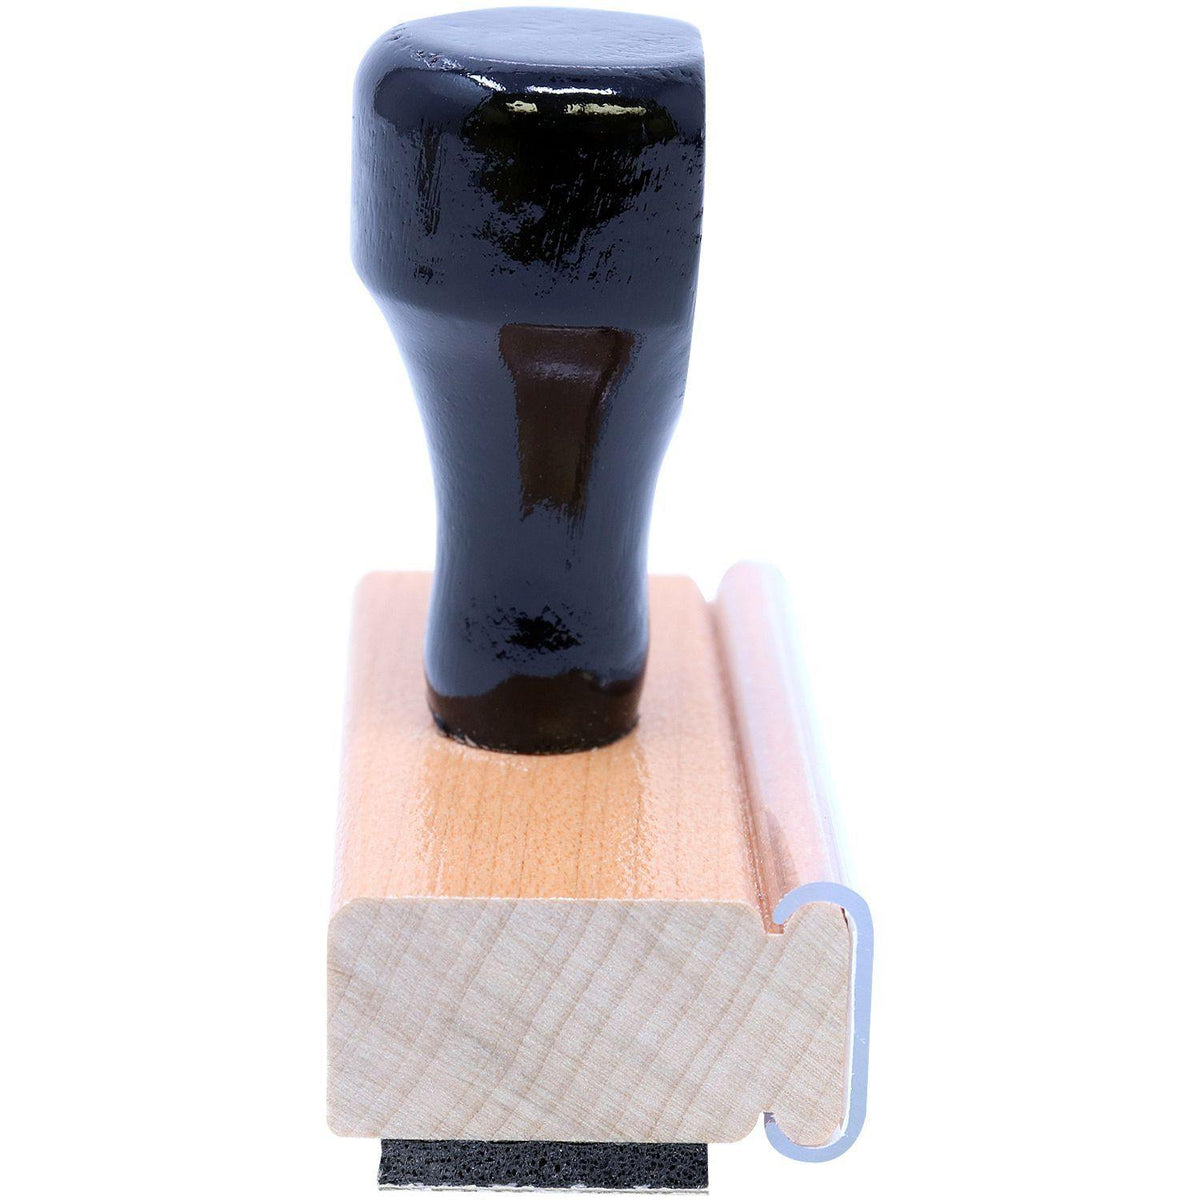 Lowercase For Deposit Only Rubber Stamp - Engineer Seal Stamps - Brand_Acorn, Impression Size_Small, Stamp Type_Regular Stamp, Type of Use_Business, Type of Use_Finance